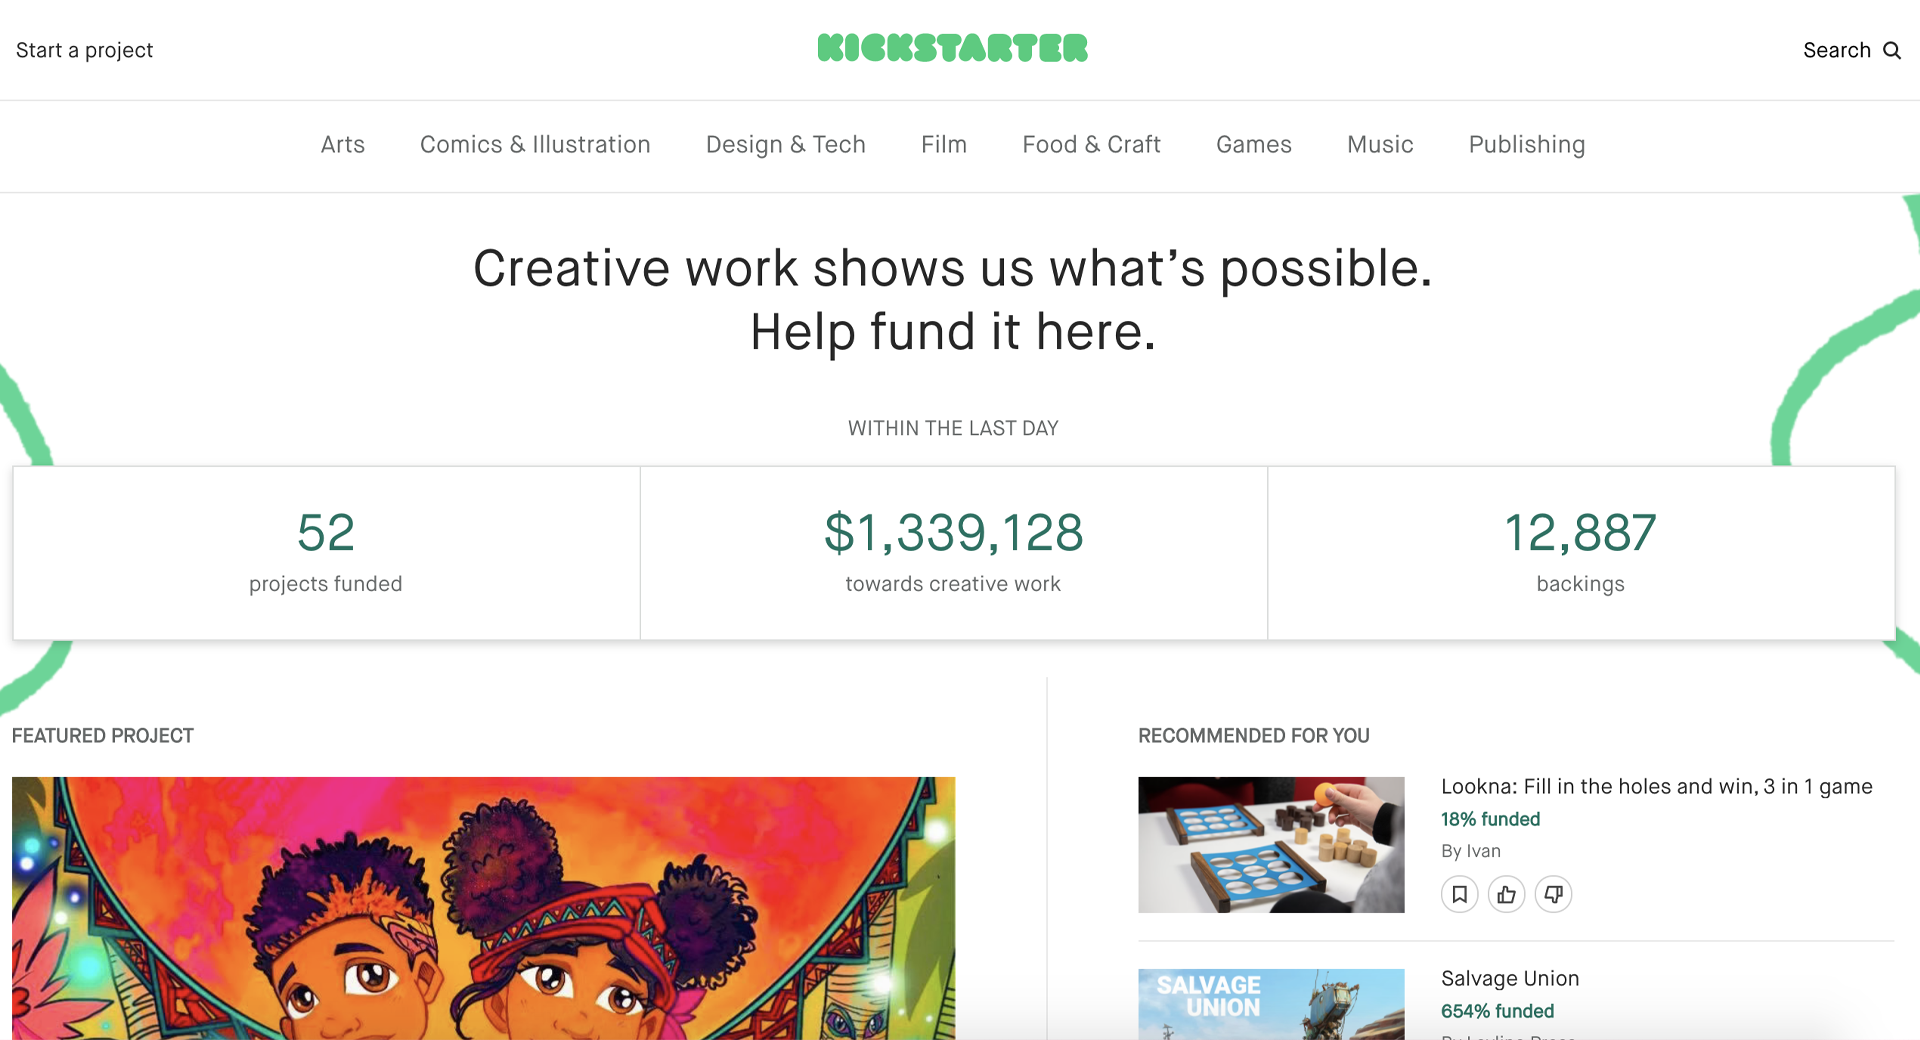 Image for "A slap in the face": Tabletop creators wrestle with the cost of departing Kickstarter in wake of crowdfunding site’s crypto plans